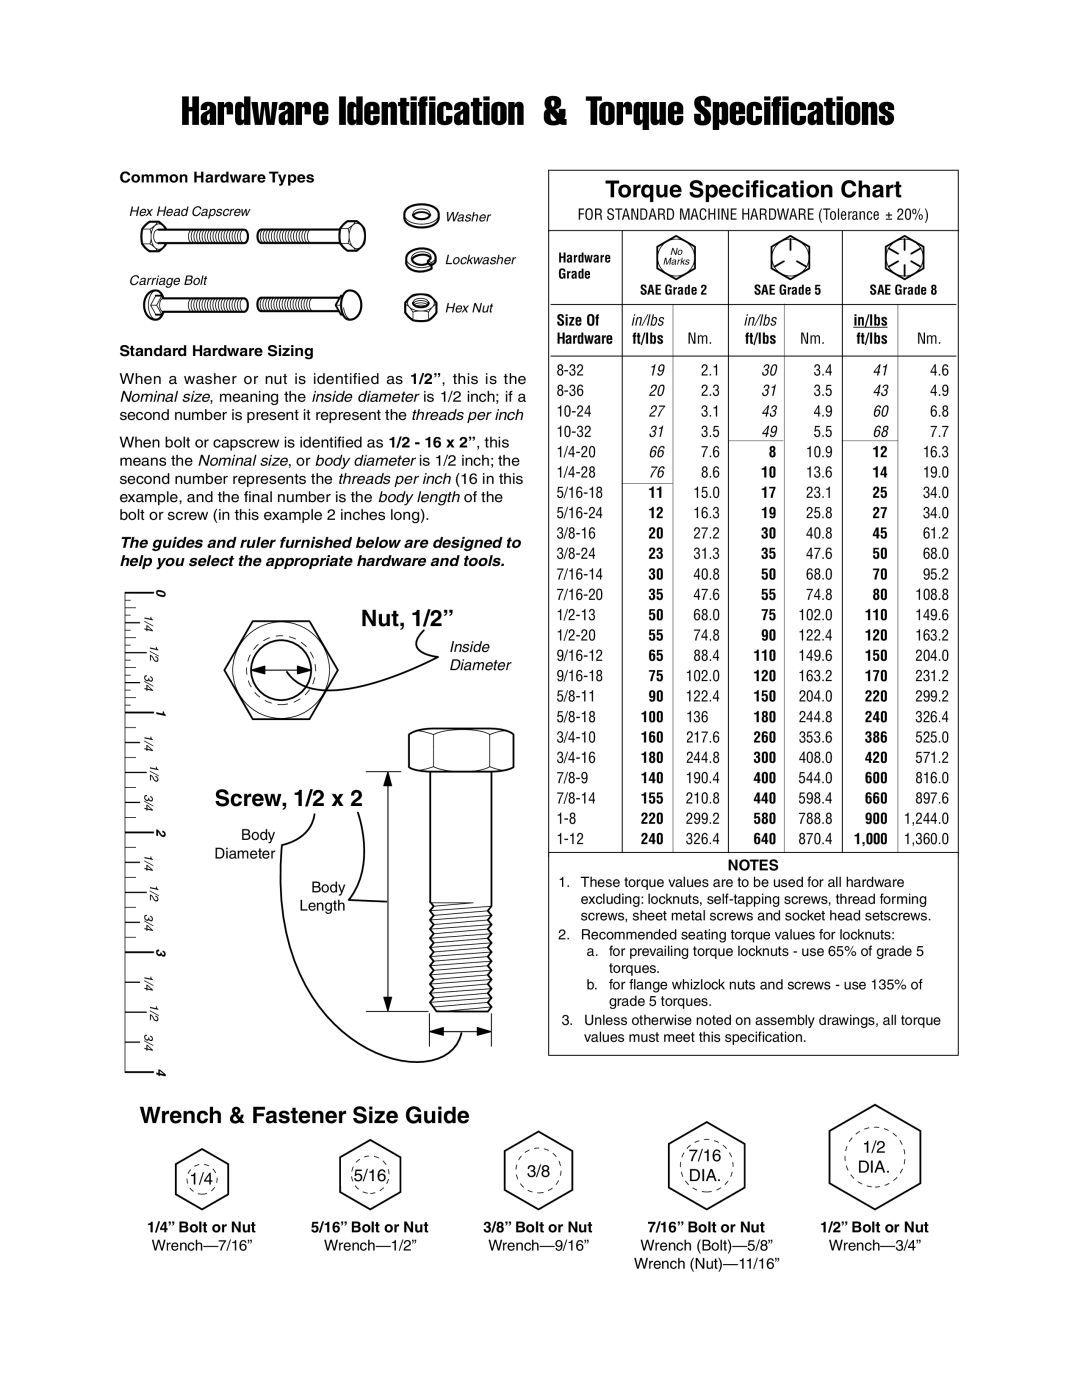 Snapper 4547 Wrench & Fastener Size Guide, Common Hardware Types, Standard Hardware Sizing, 1/4” Bolt or Nut, Nut, 1/2” 